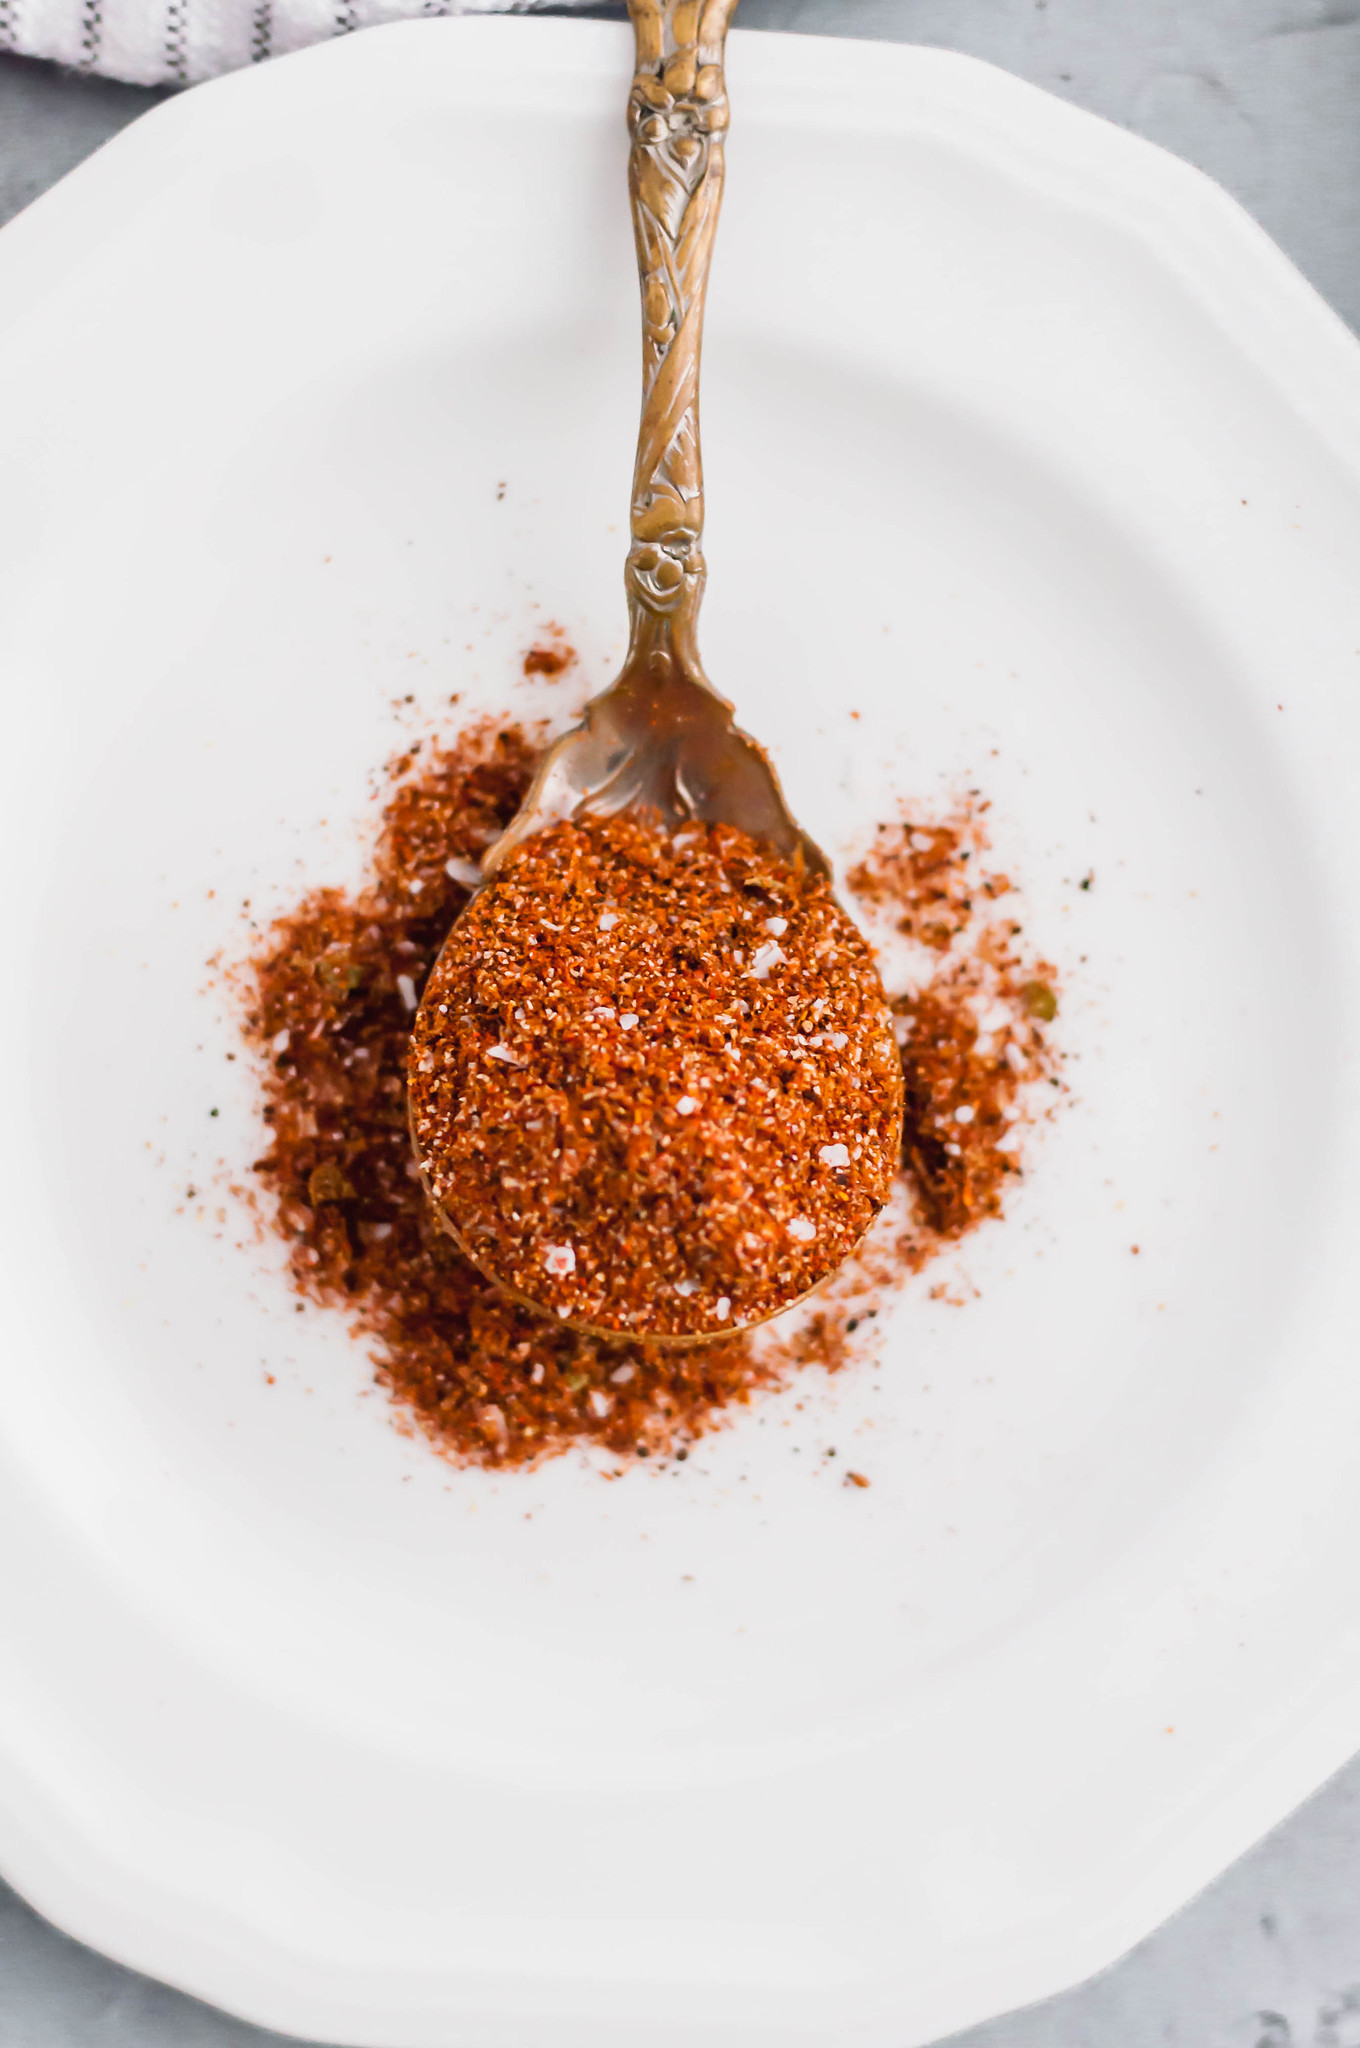 This Fajita Seasoning Recipe will make you forget the store-bought stuff. Using pantry staples, make your own spicy, smoky fajita seasoning just how you like it. No natural flavors or weird ingredients in this homemade spice mix.